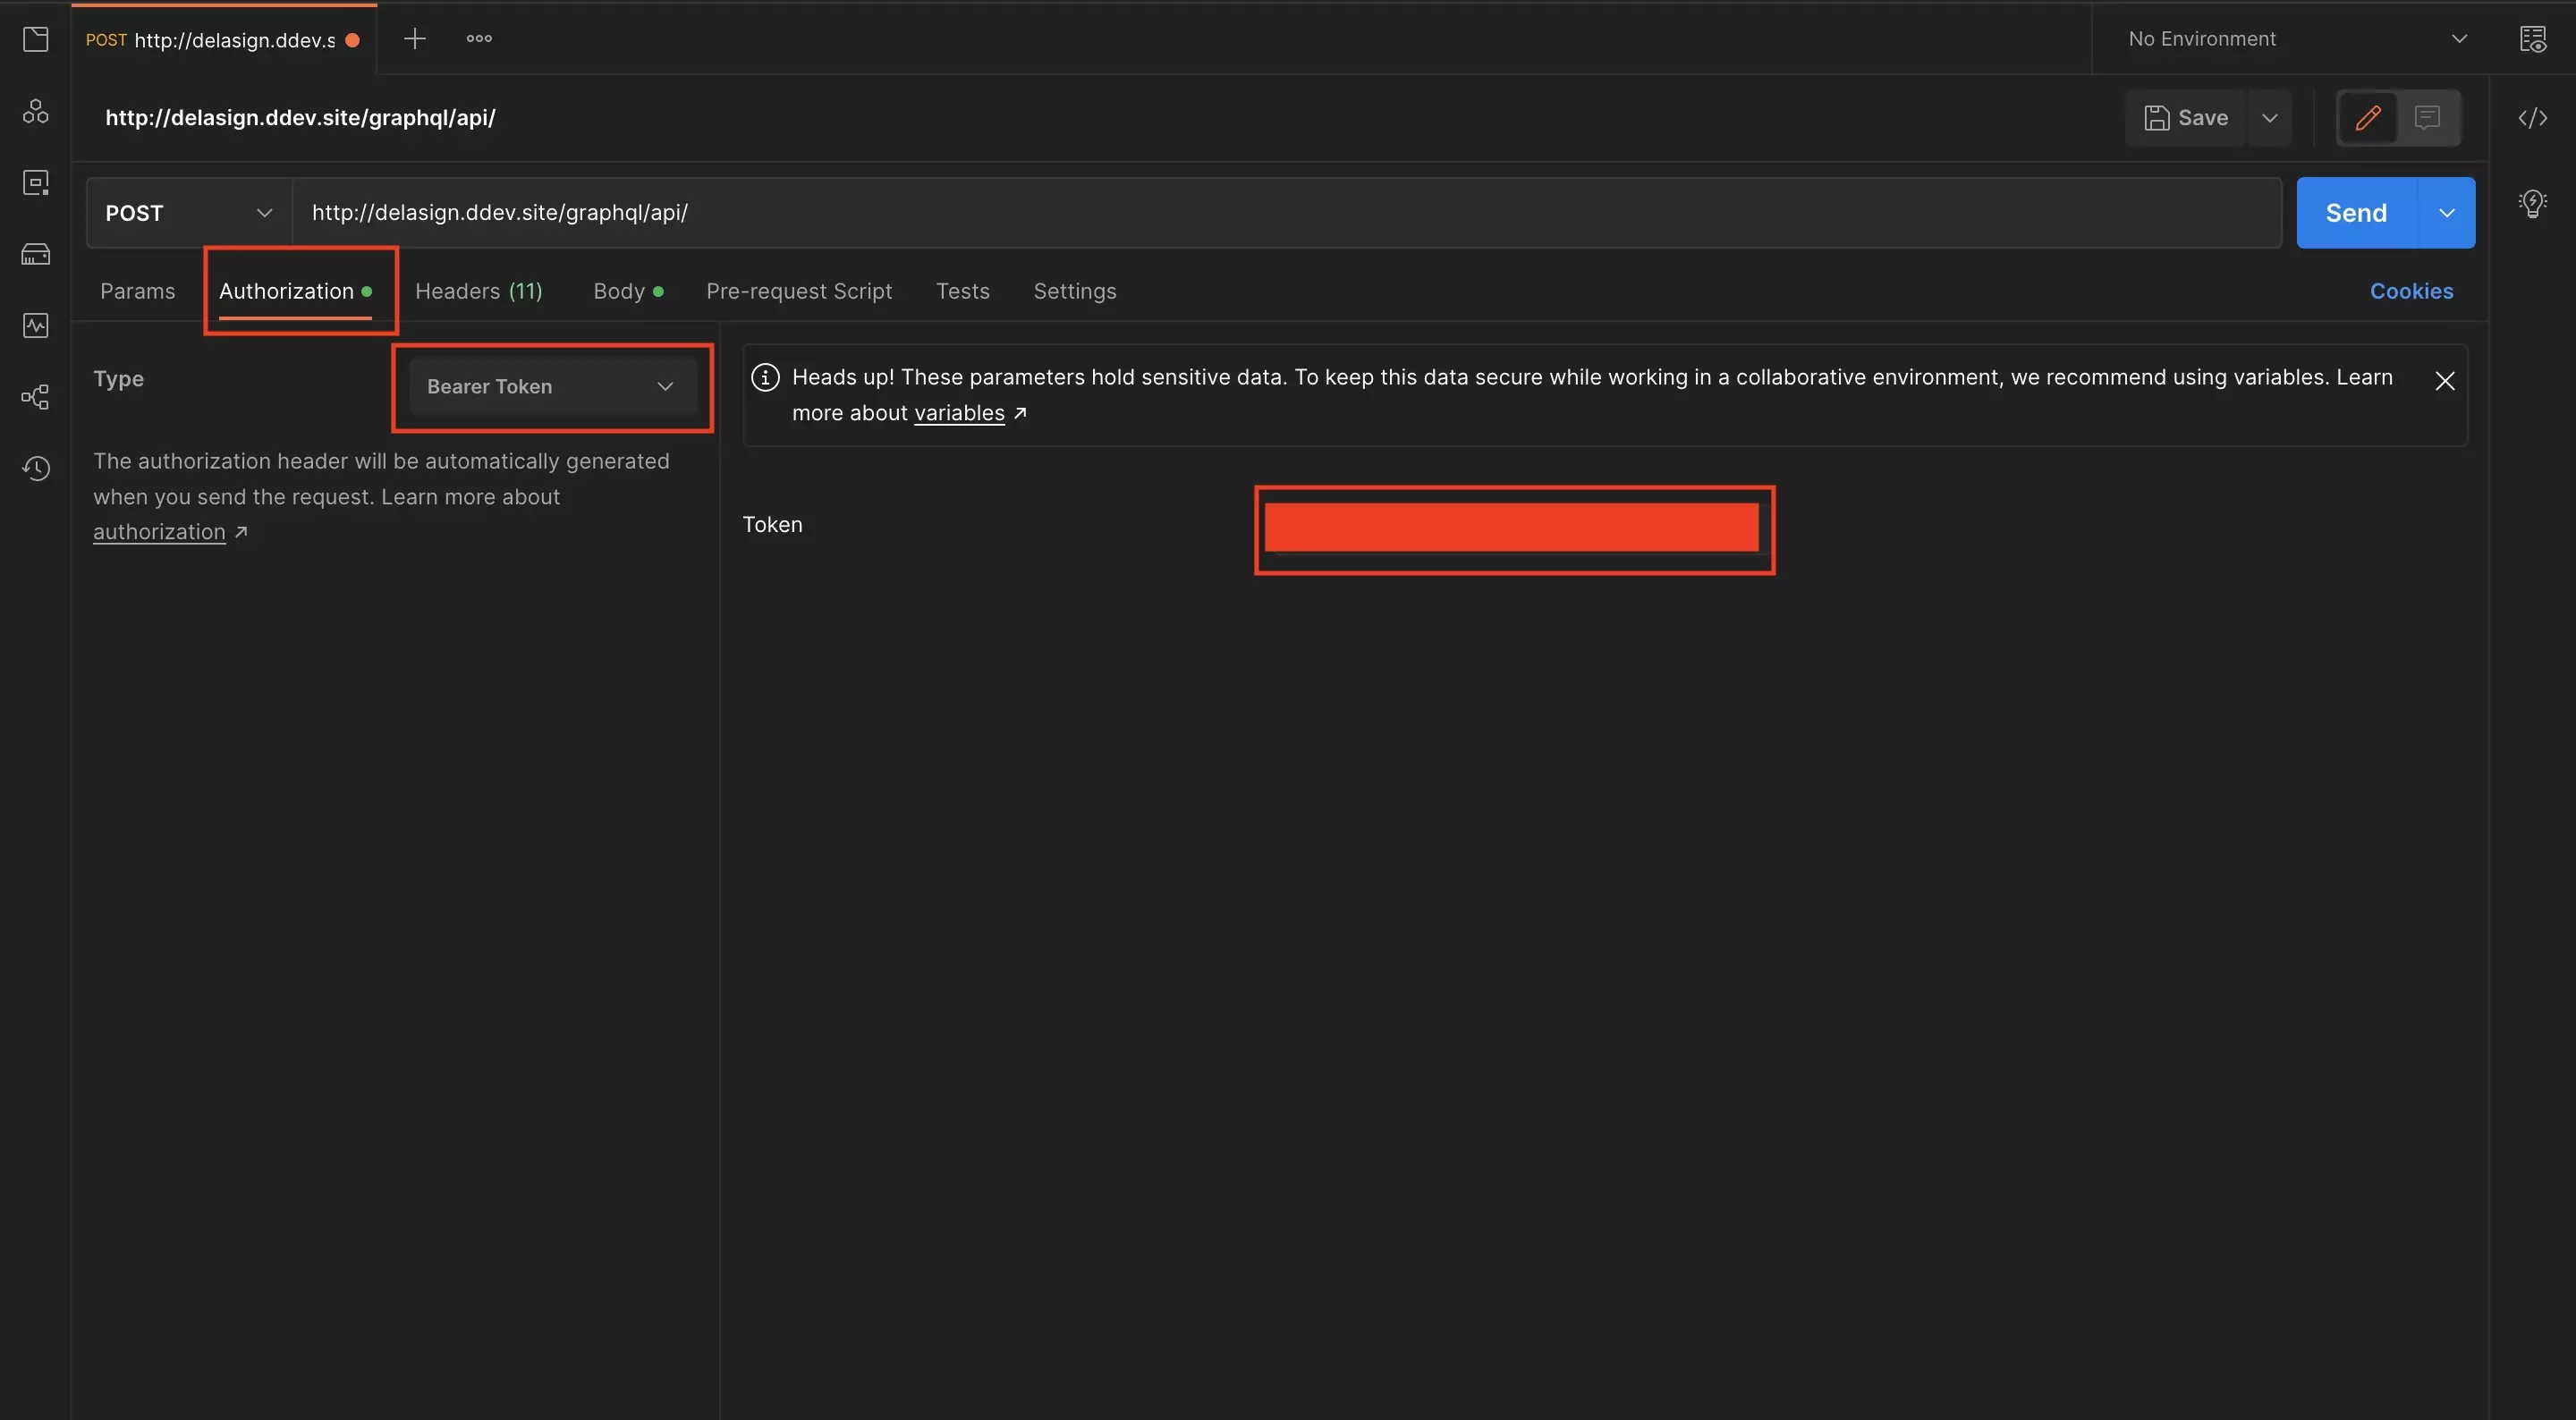 A screenshot of Postman showing how to setup the authorization bearer token. Highlighted are the "Authorization" tab, the Type dropdown with the type set to "Bearer Token" and the Token input box.